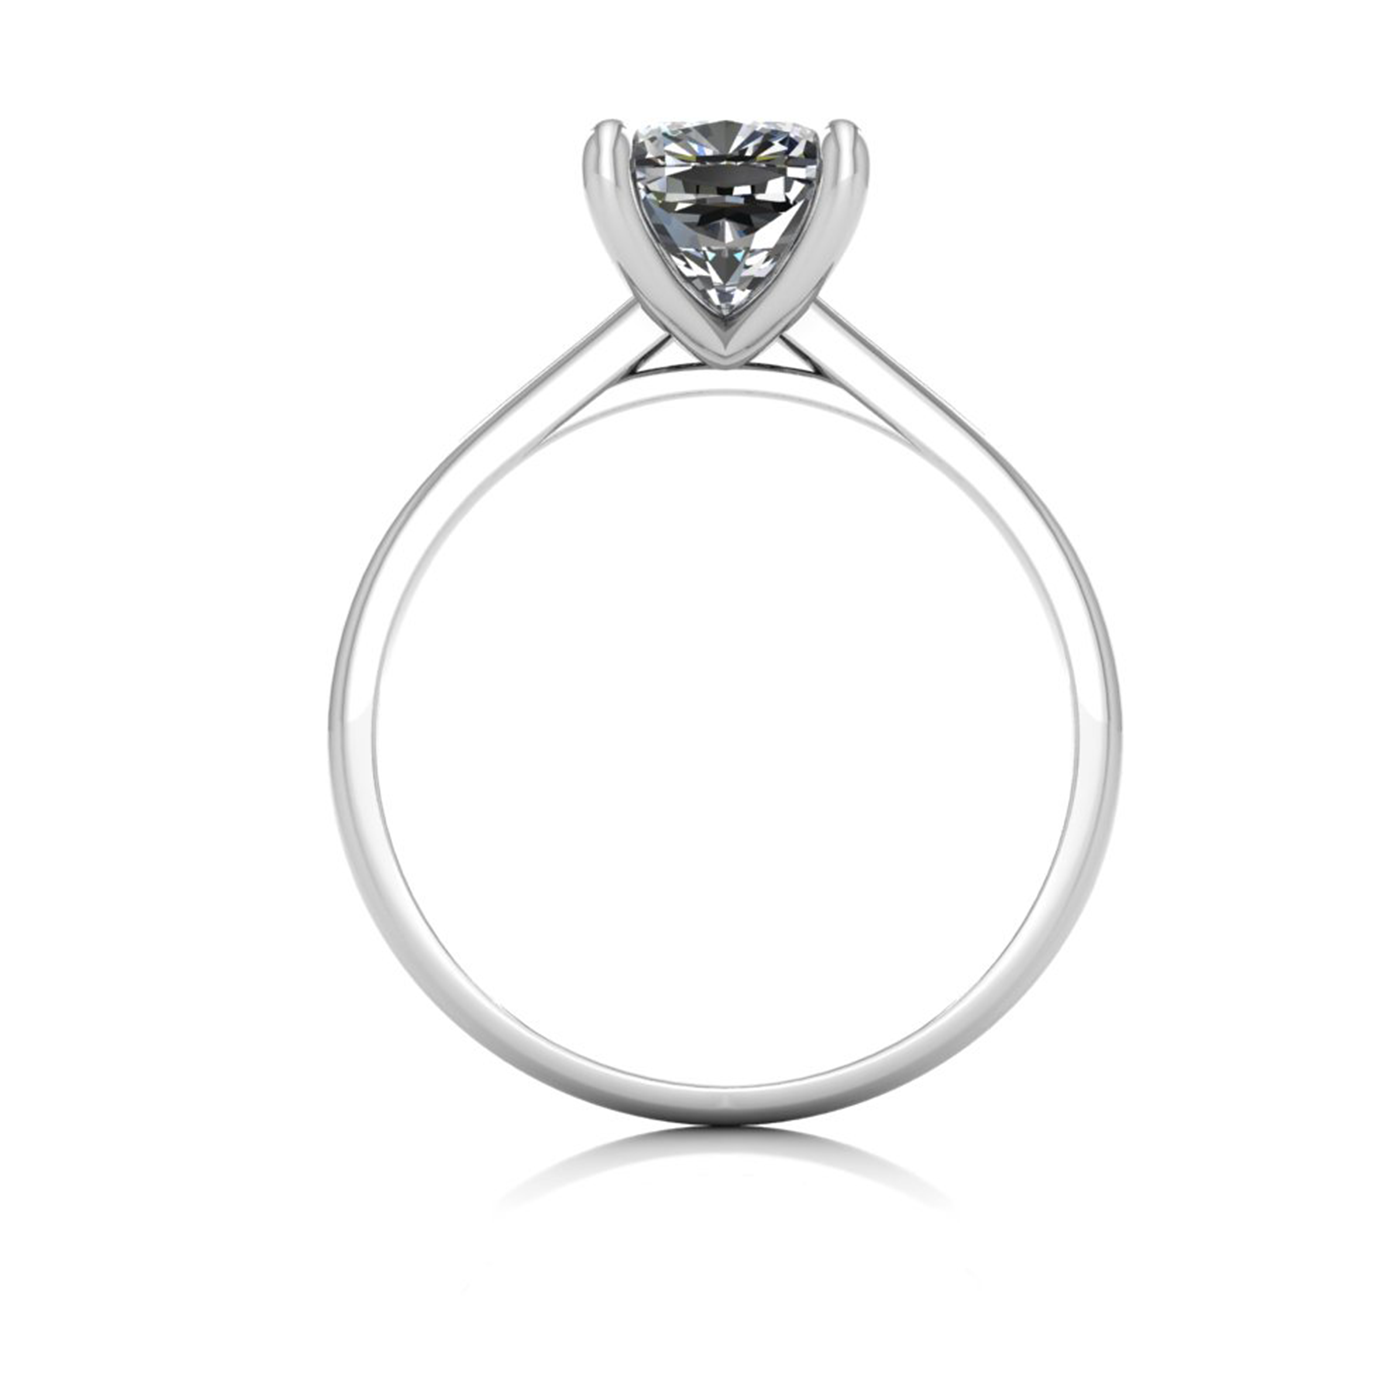 18k white gold 2.0ct 4 prongs solitaire cushion cut diamond engagement ring with whisper thin band